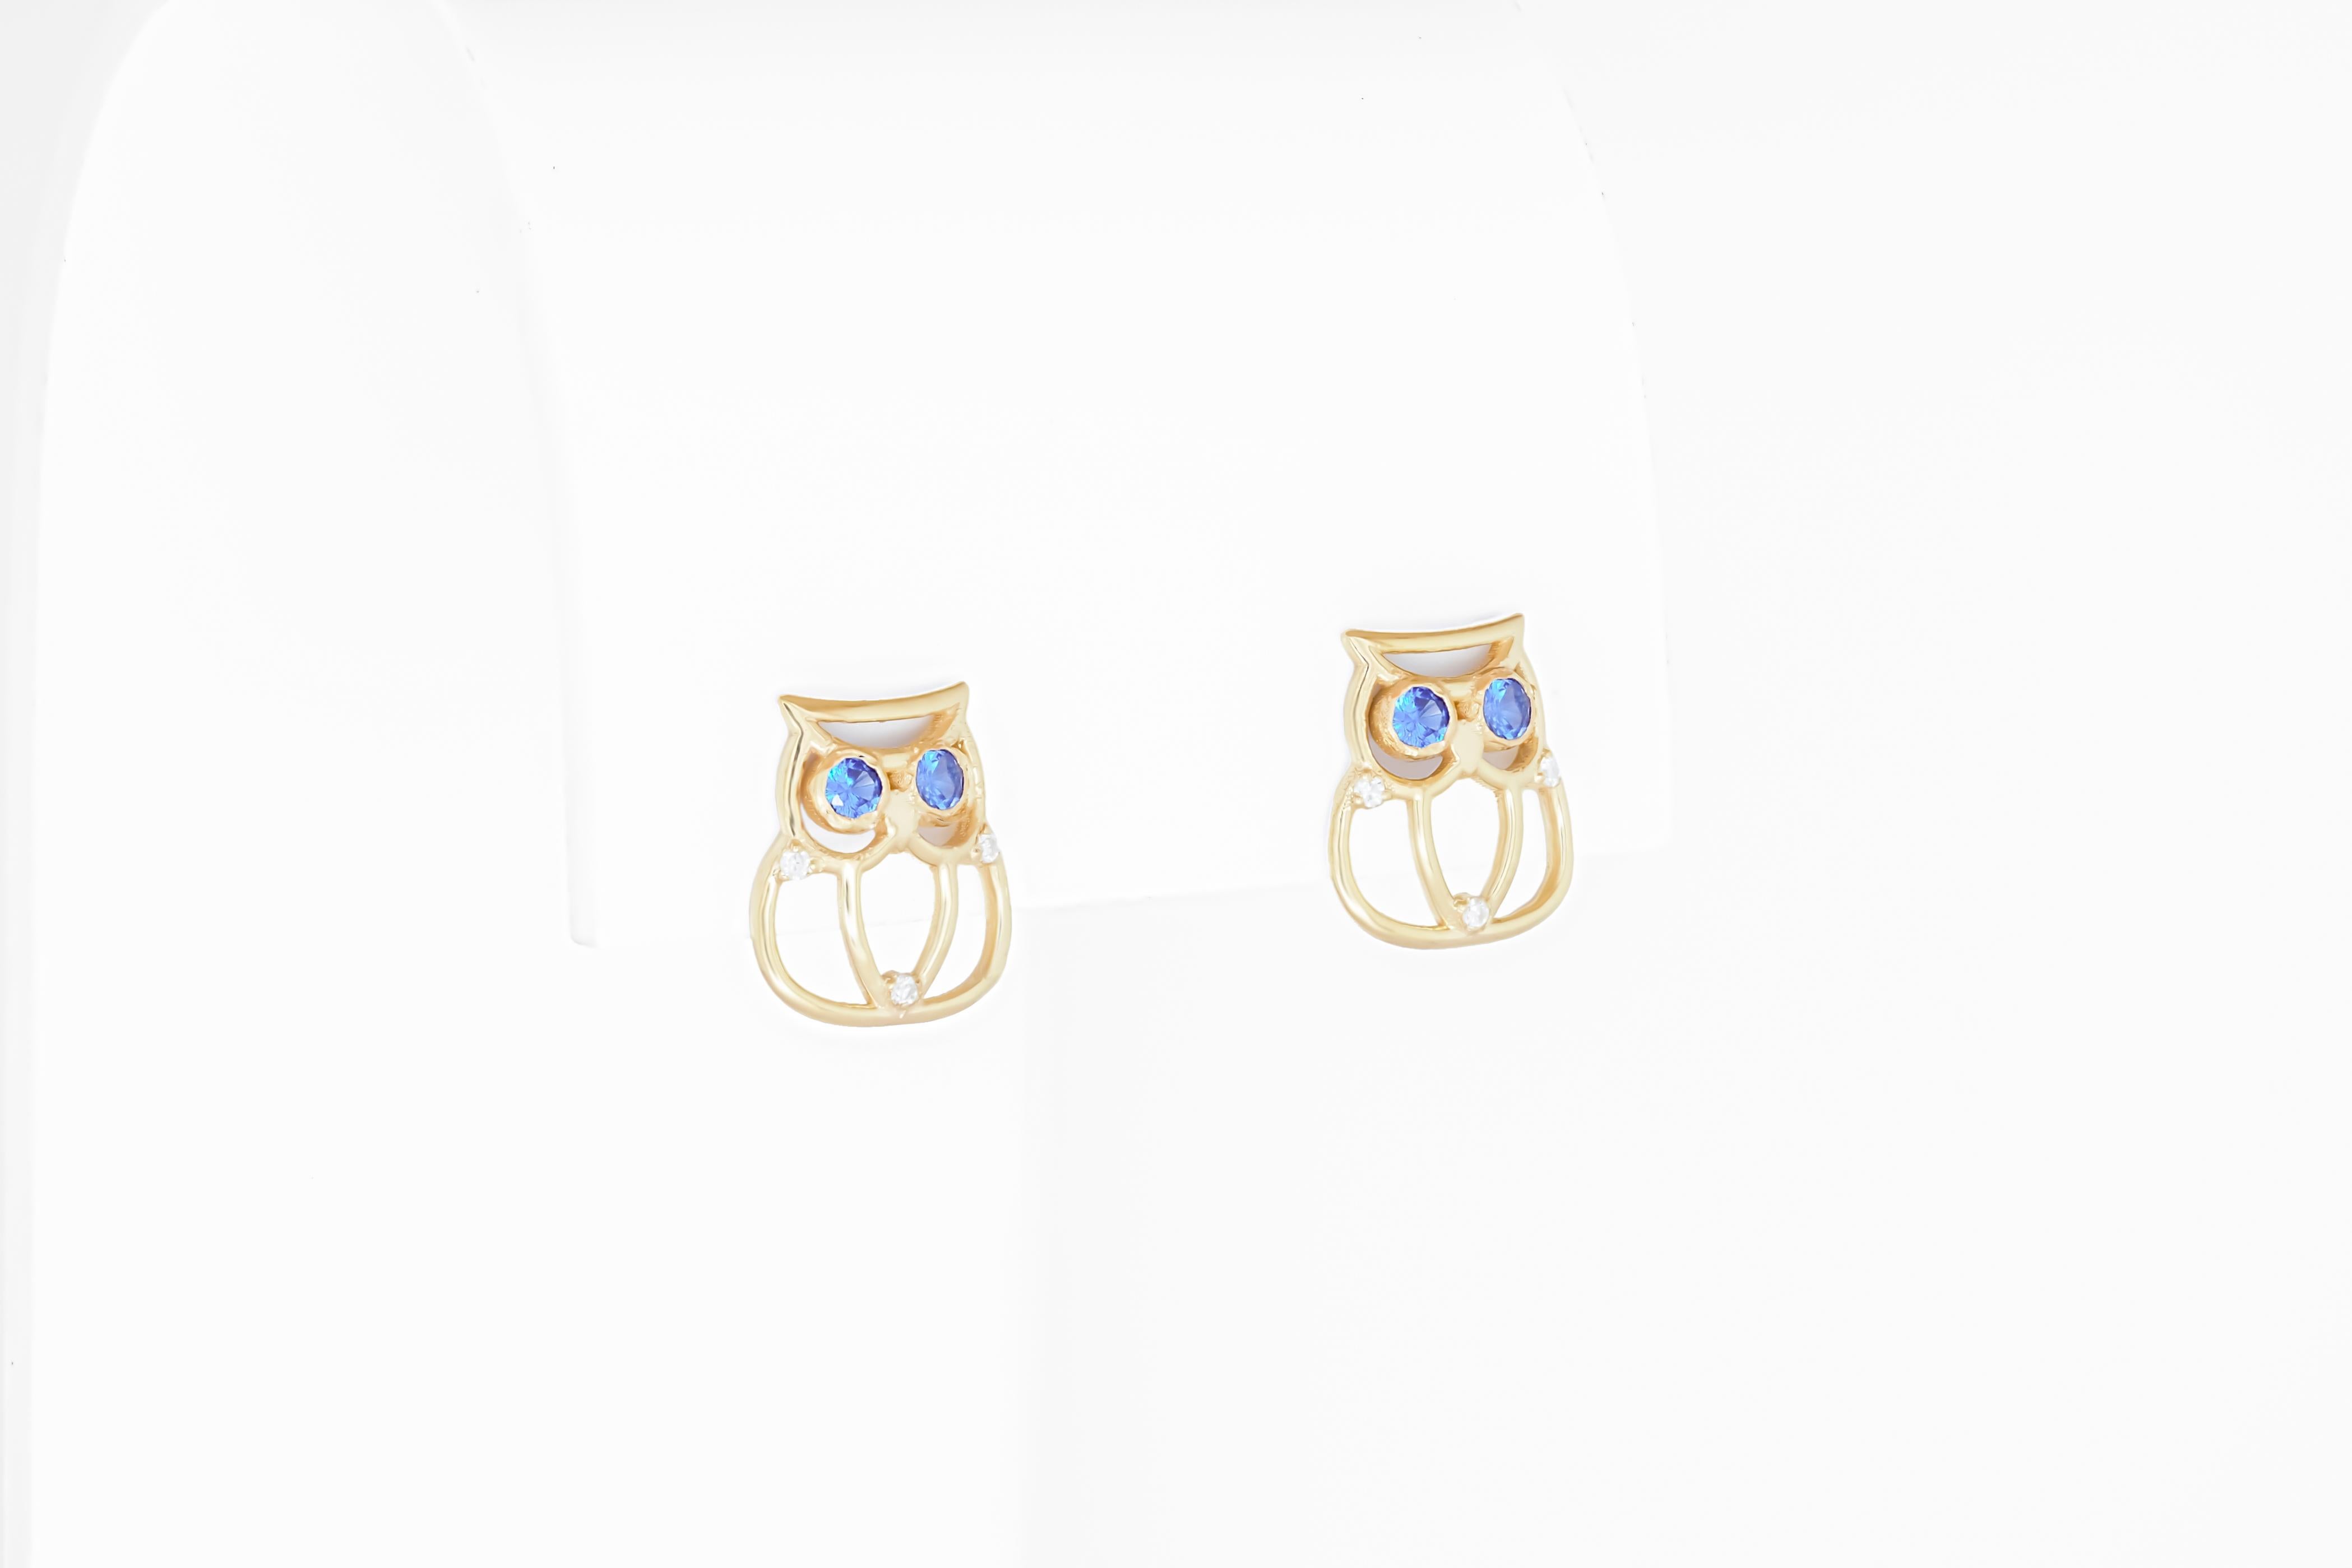 Round Cut Owl earrings and ring set in 14k gold.  For Sale